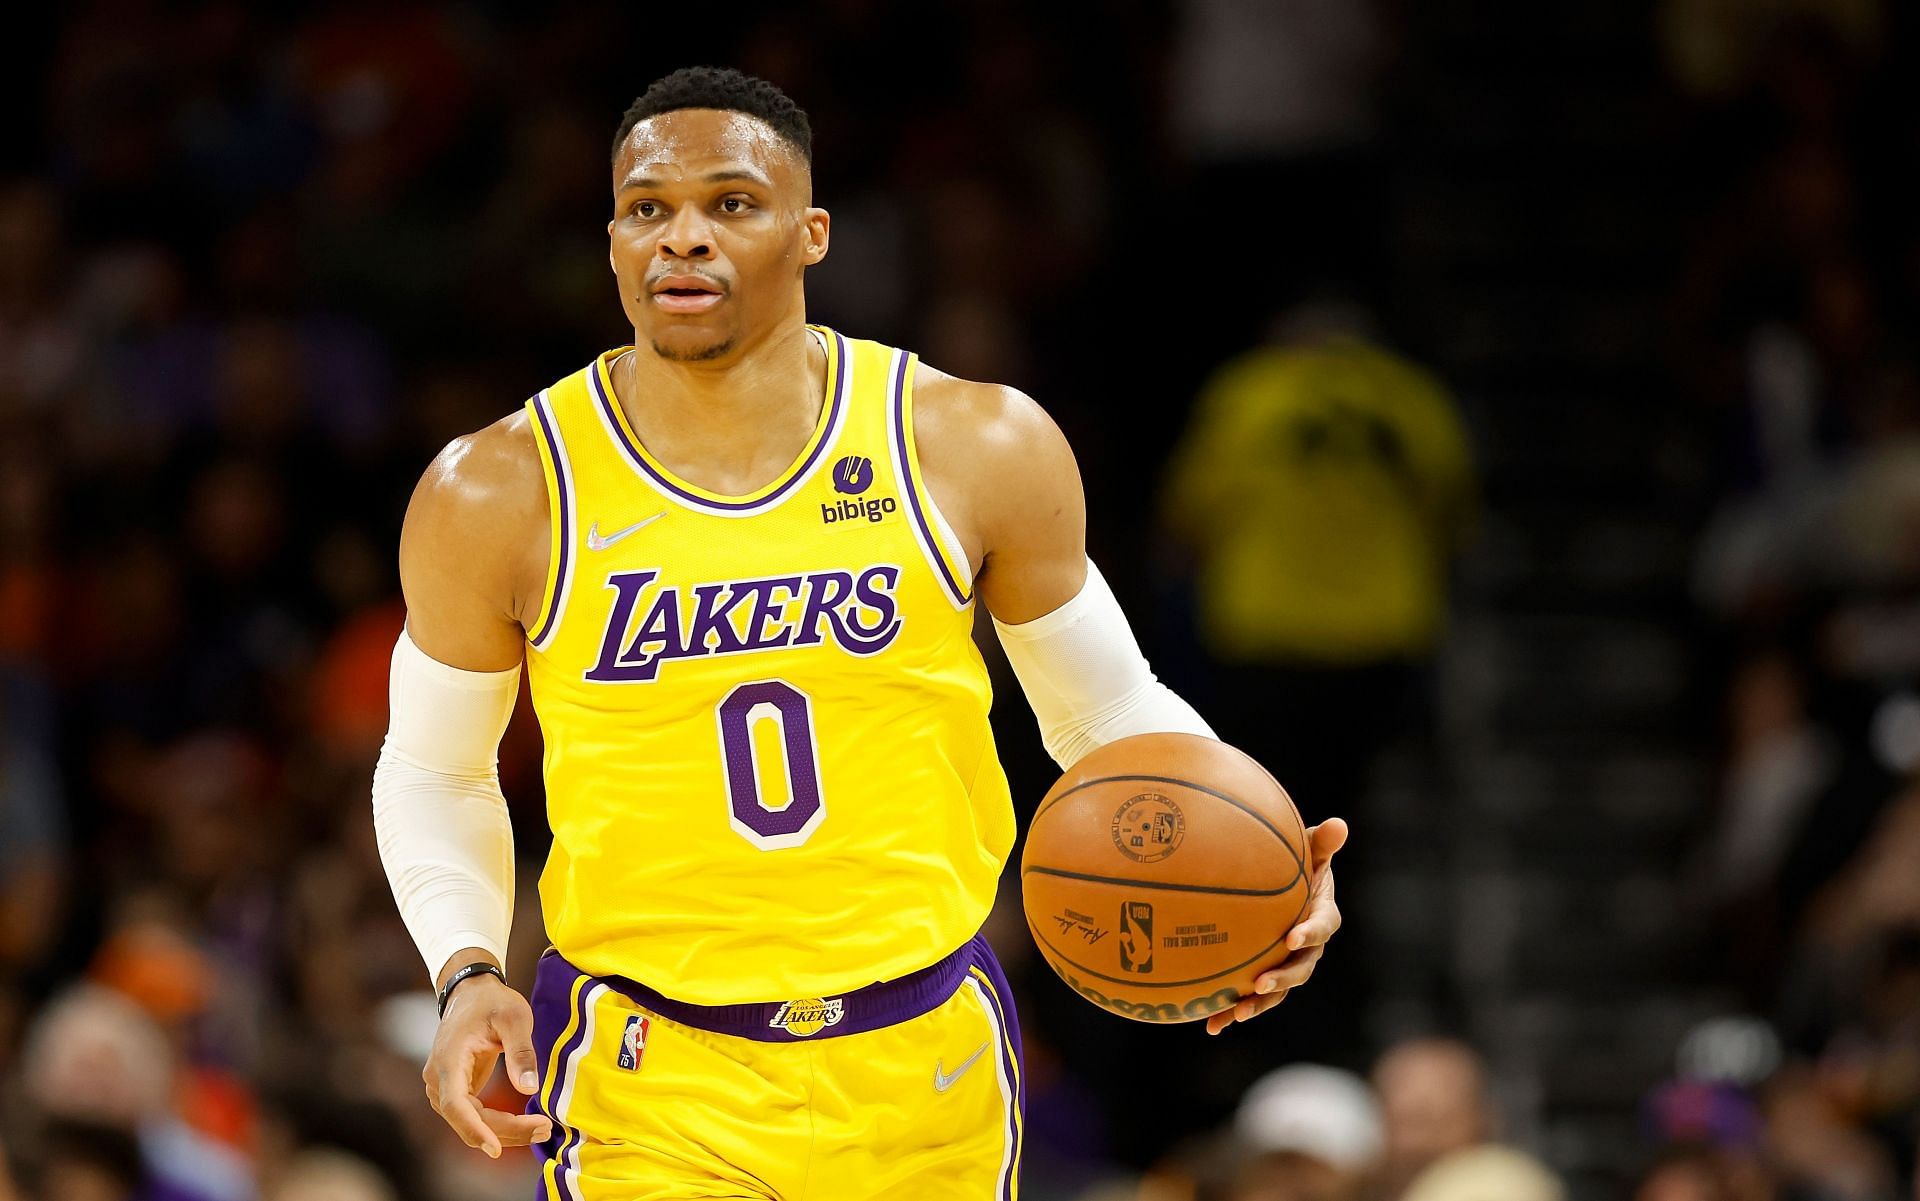 Russell Westbrook brings the ball up the floor for the LA Lakers